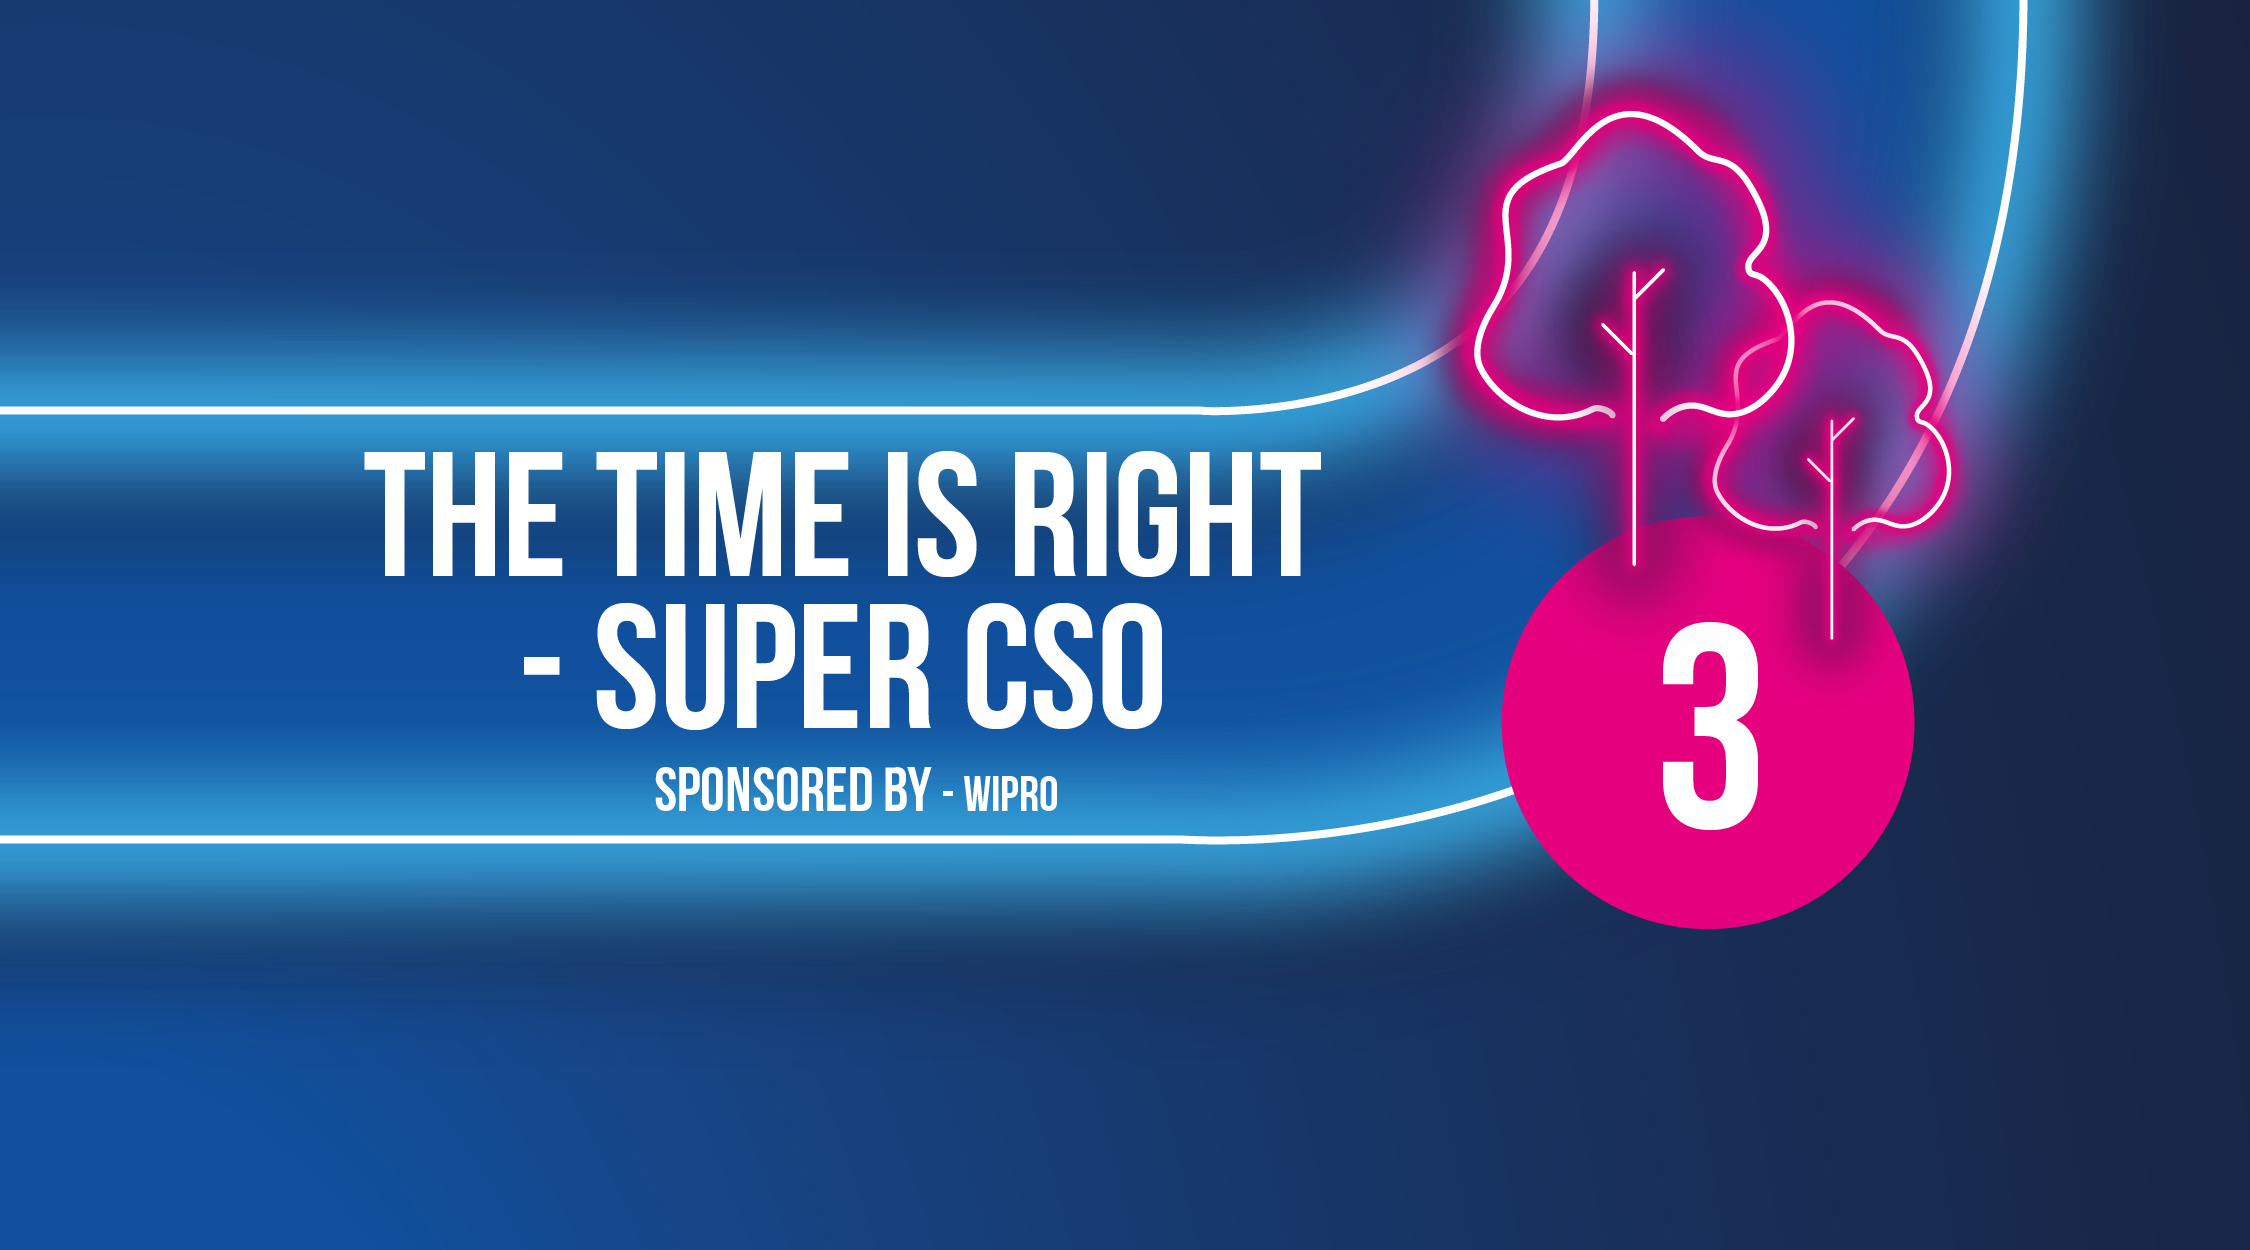 The time is right - super CSO